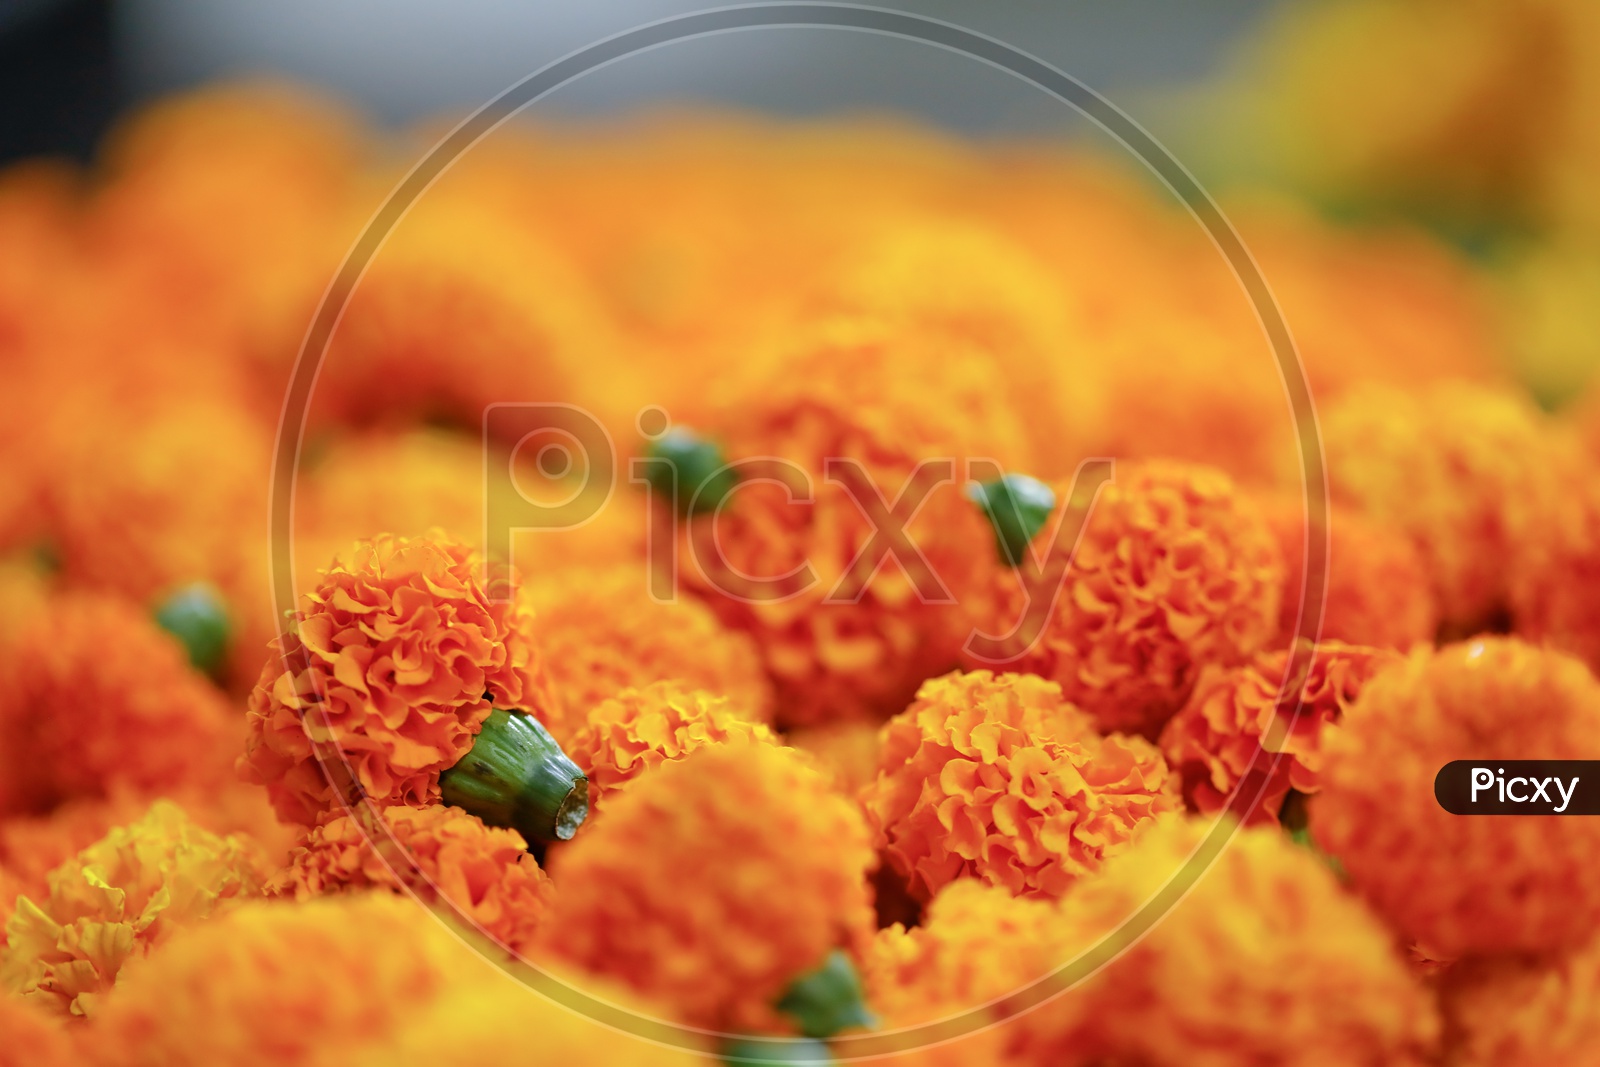 Marigold Flowers  in a Vendor Stall At Market  Closeup